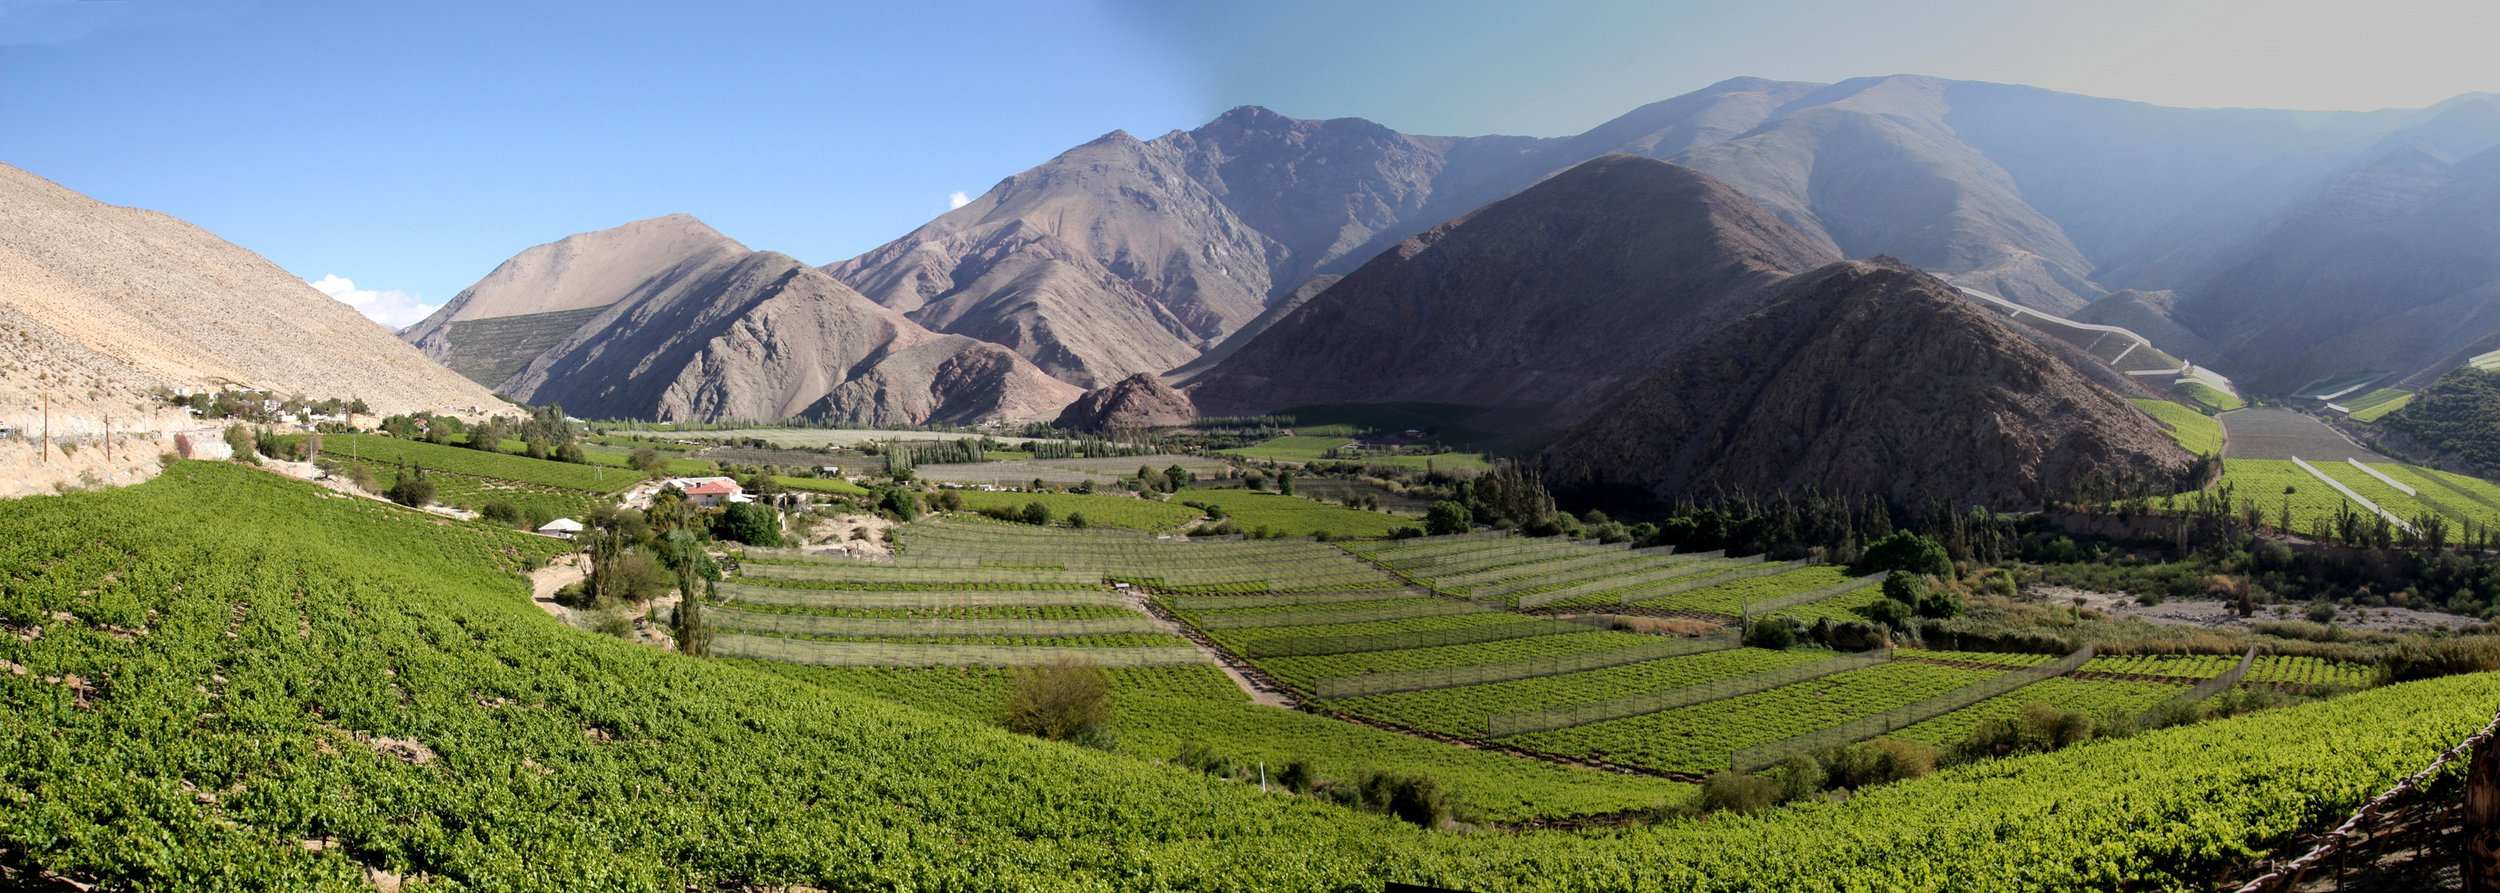 bright green fields of grapes, to be processed into Pisco, in a small, mountain enclosed valley in the Elqui Valley region.